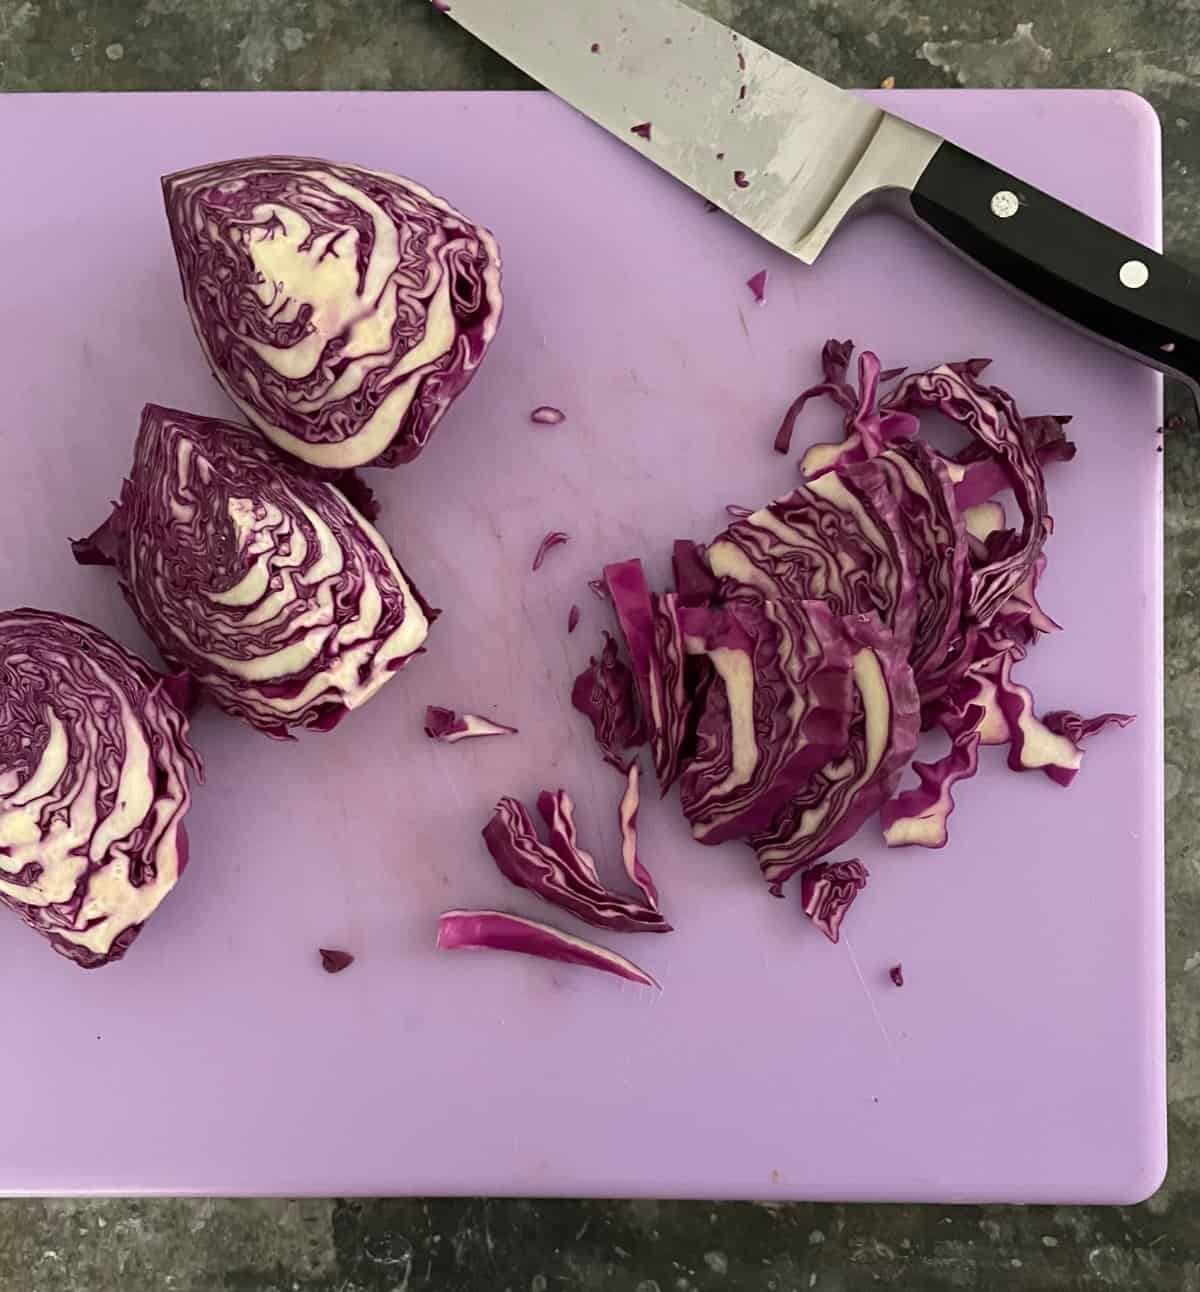 three whole quarters of a purple cabbage, shredded cabbage, and a chef's knife on a purple cutting board.